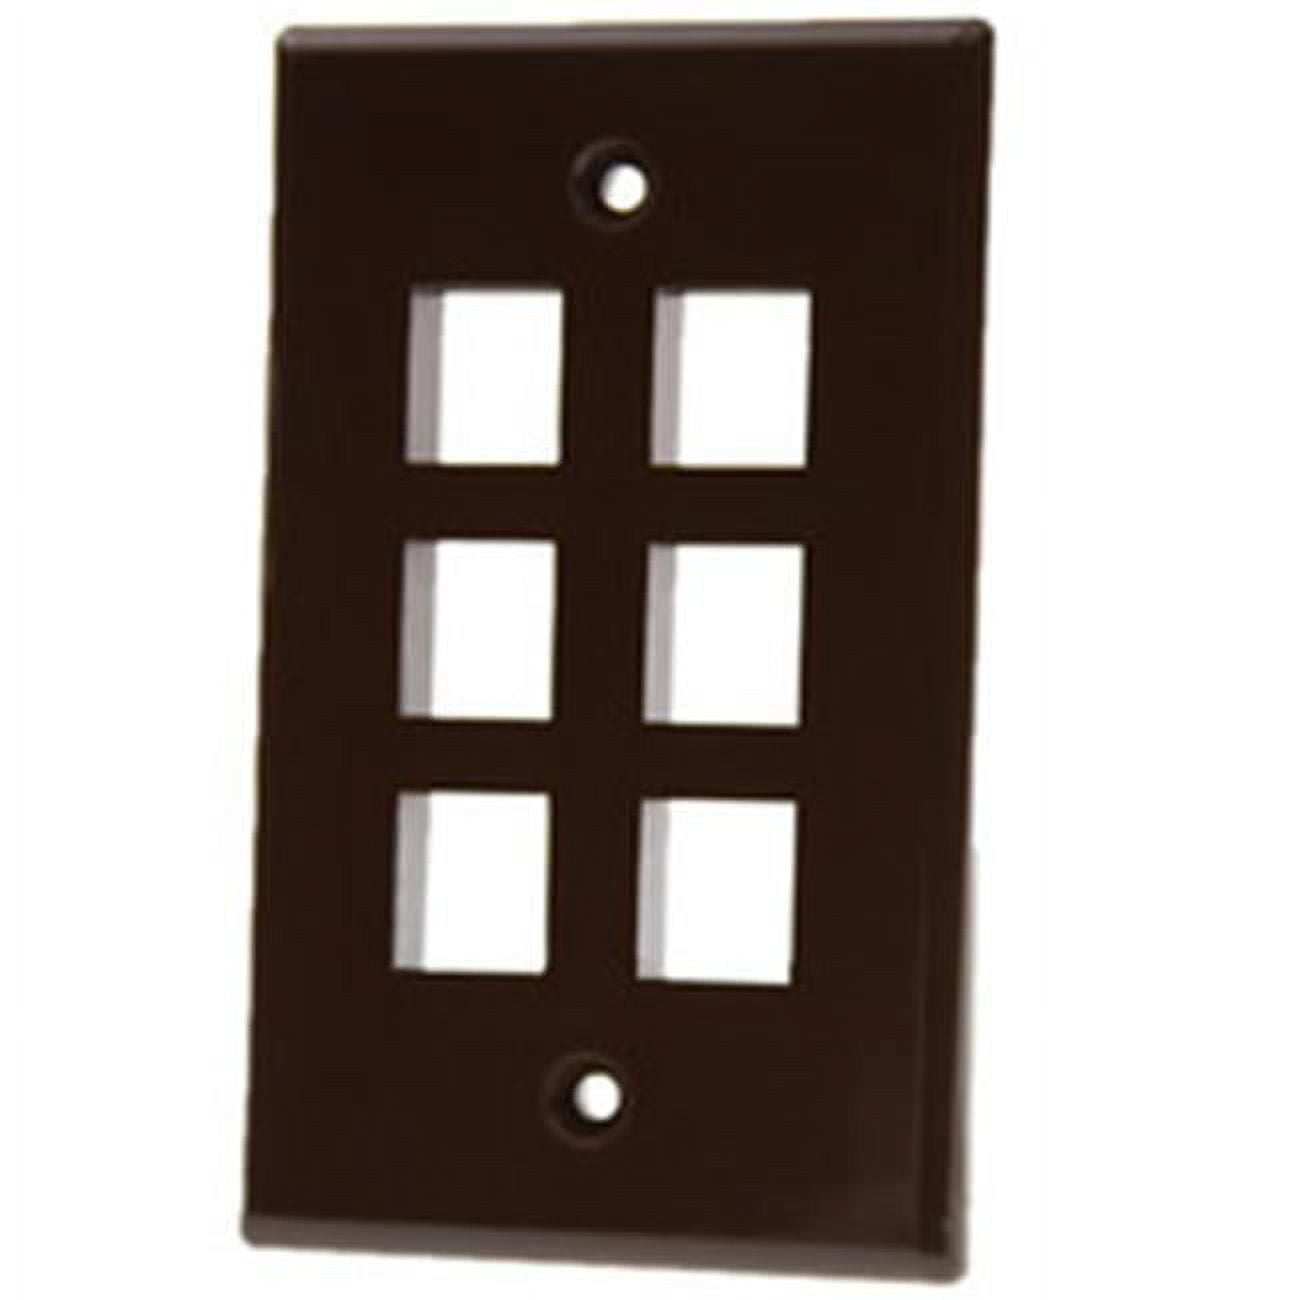 Picture of CableWholesale 3012-03206 6 Port Single Gang Keystone Wall Plate, Brown